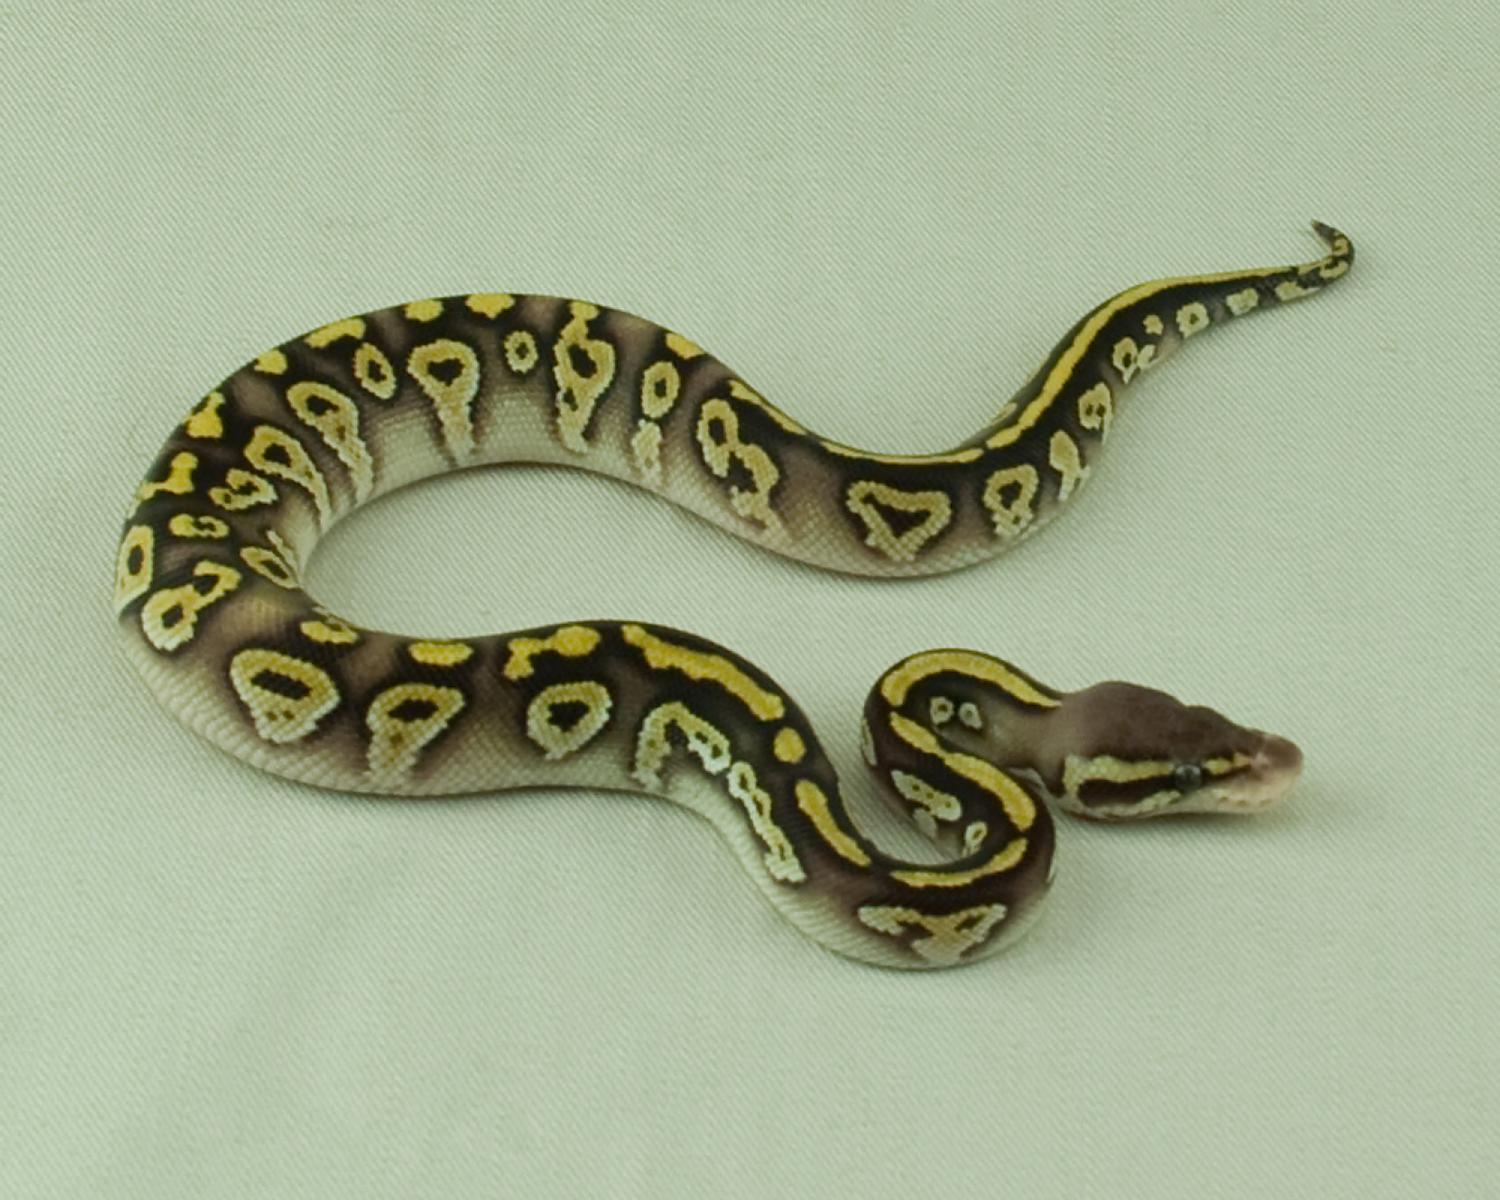 2014 clutch 1 male pastel mojave melanistic 2 cropped 2014-06-26